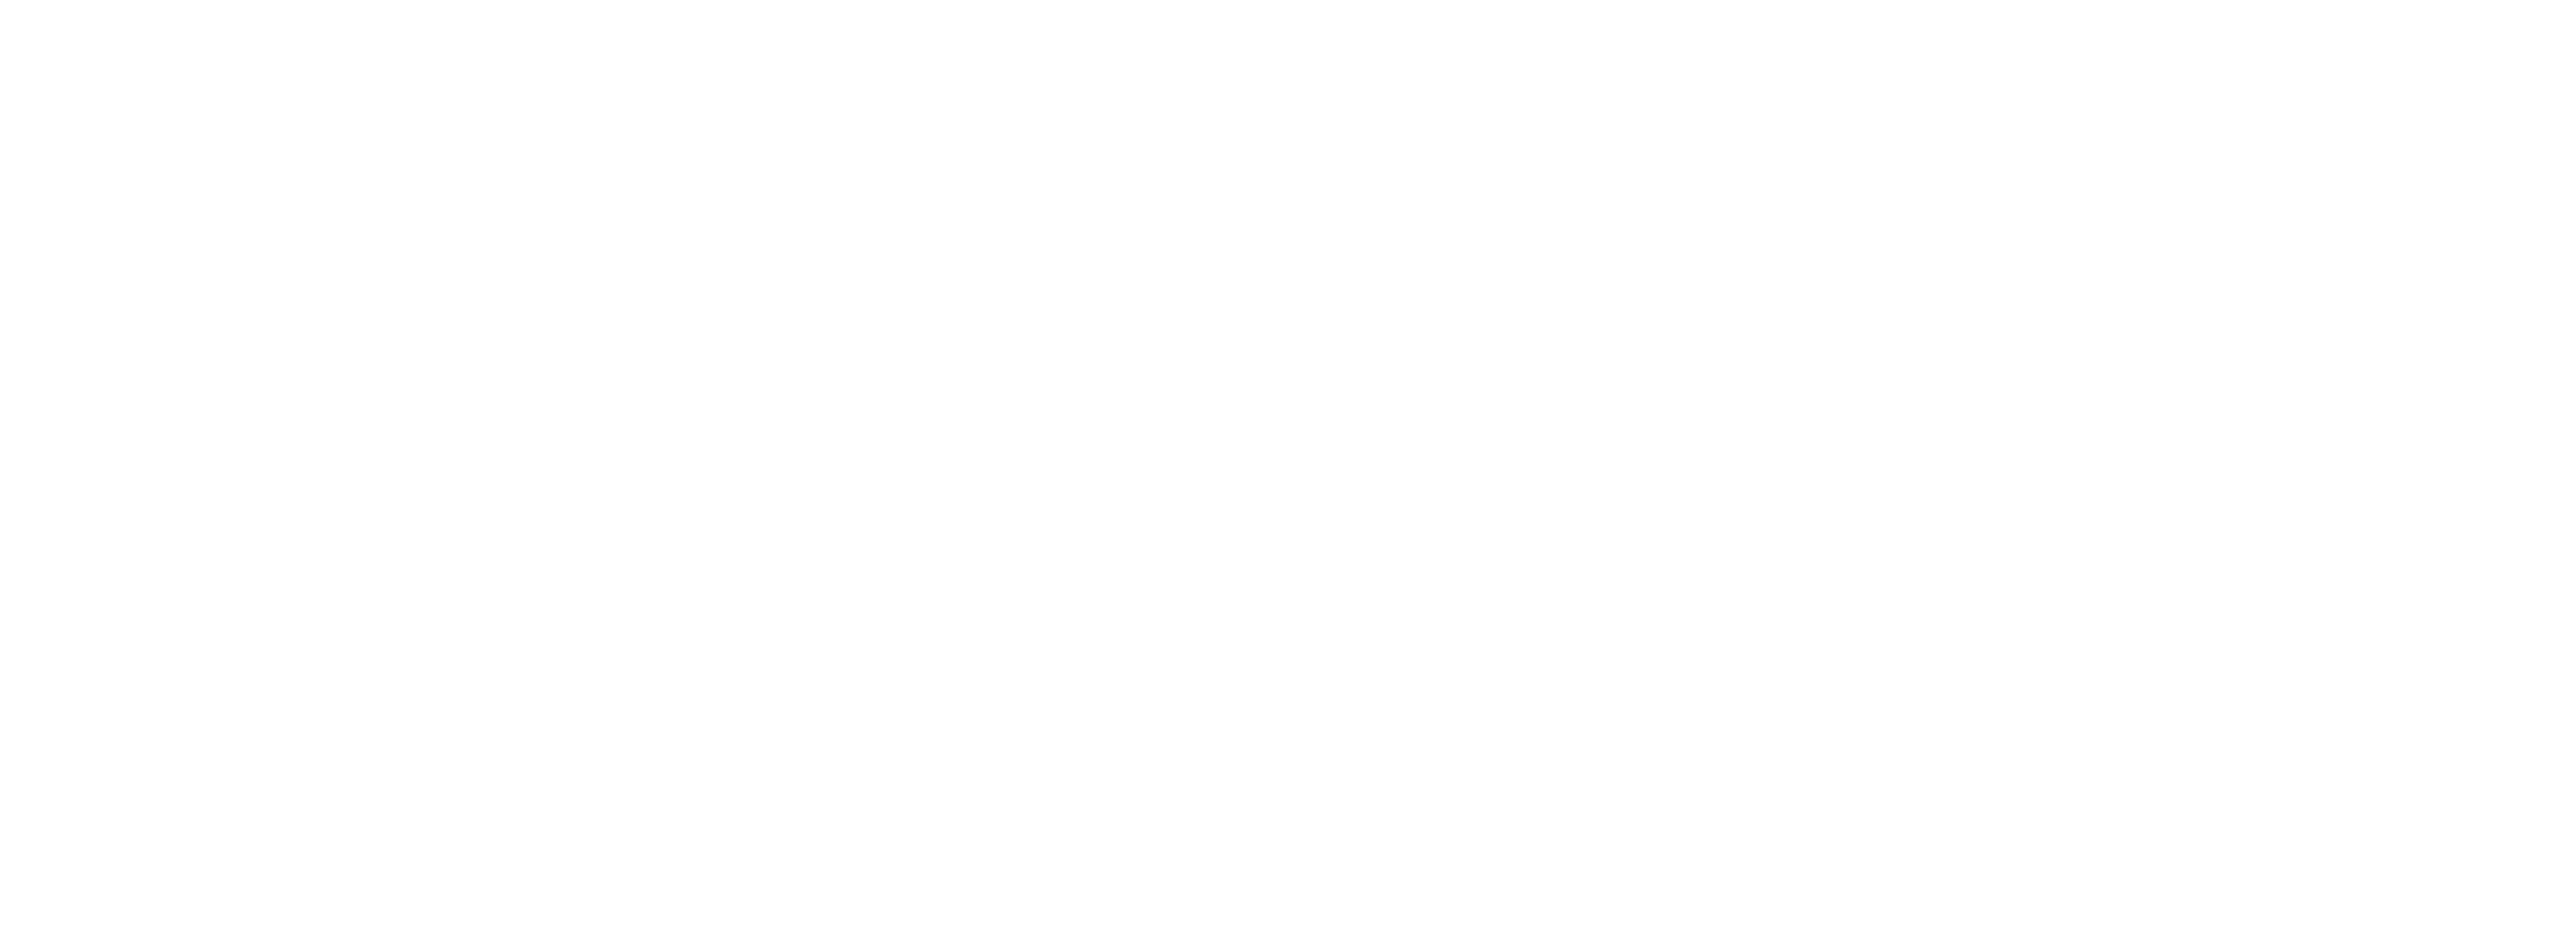 Watergate: High Crimes in the White House logo